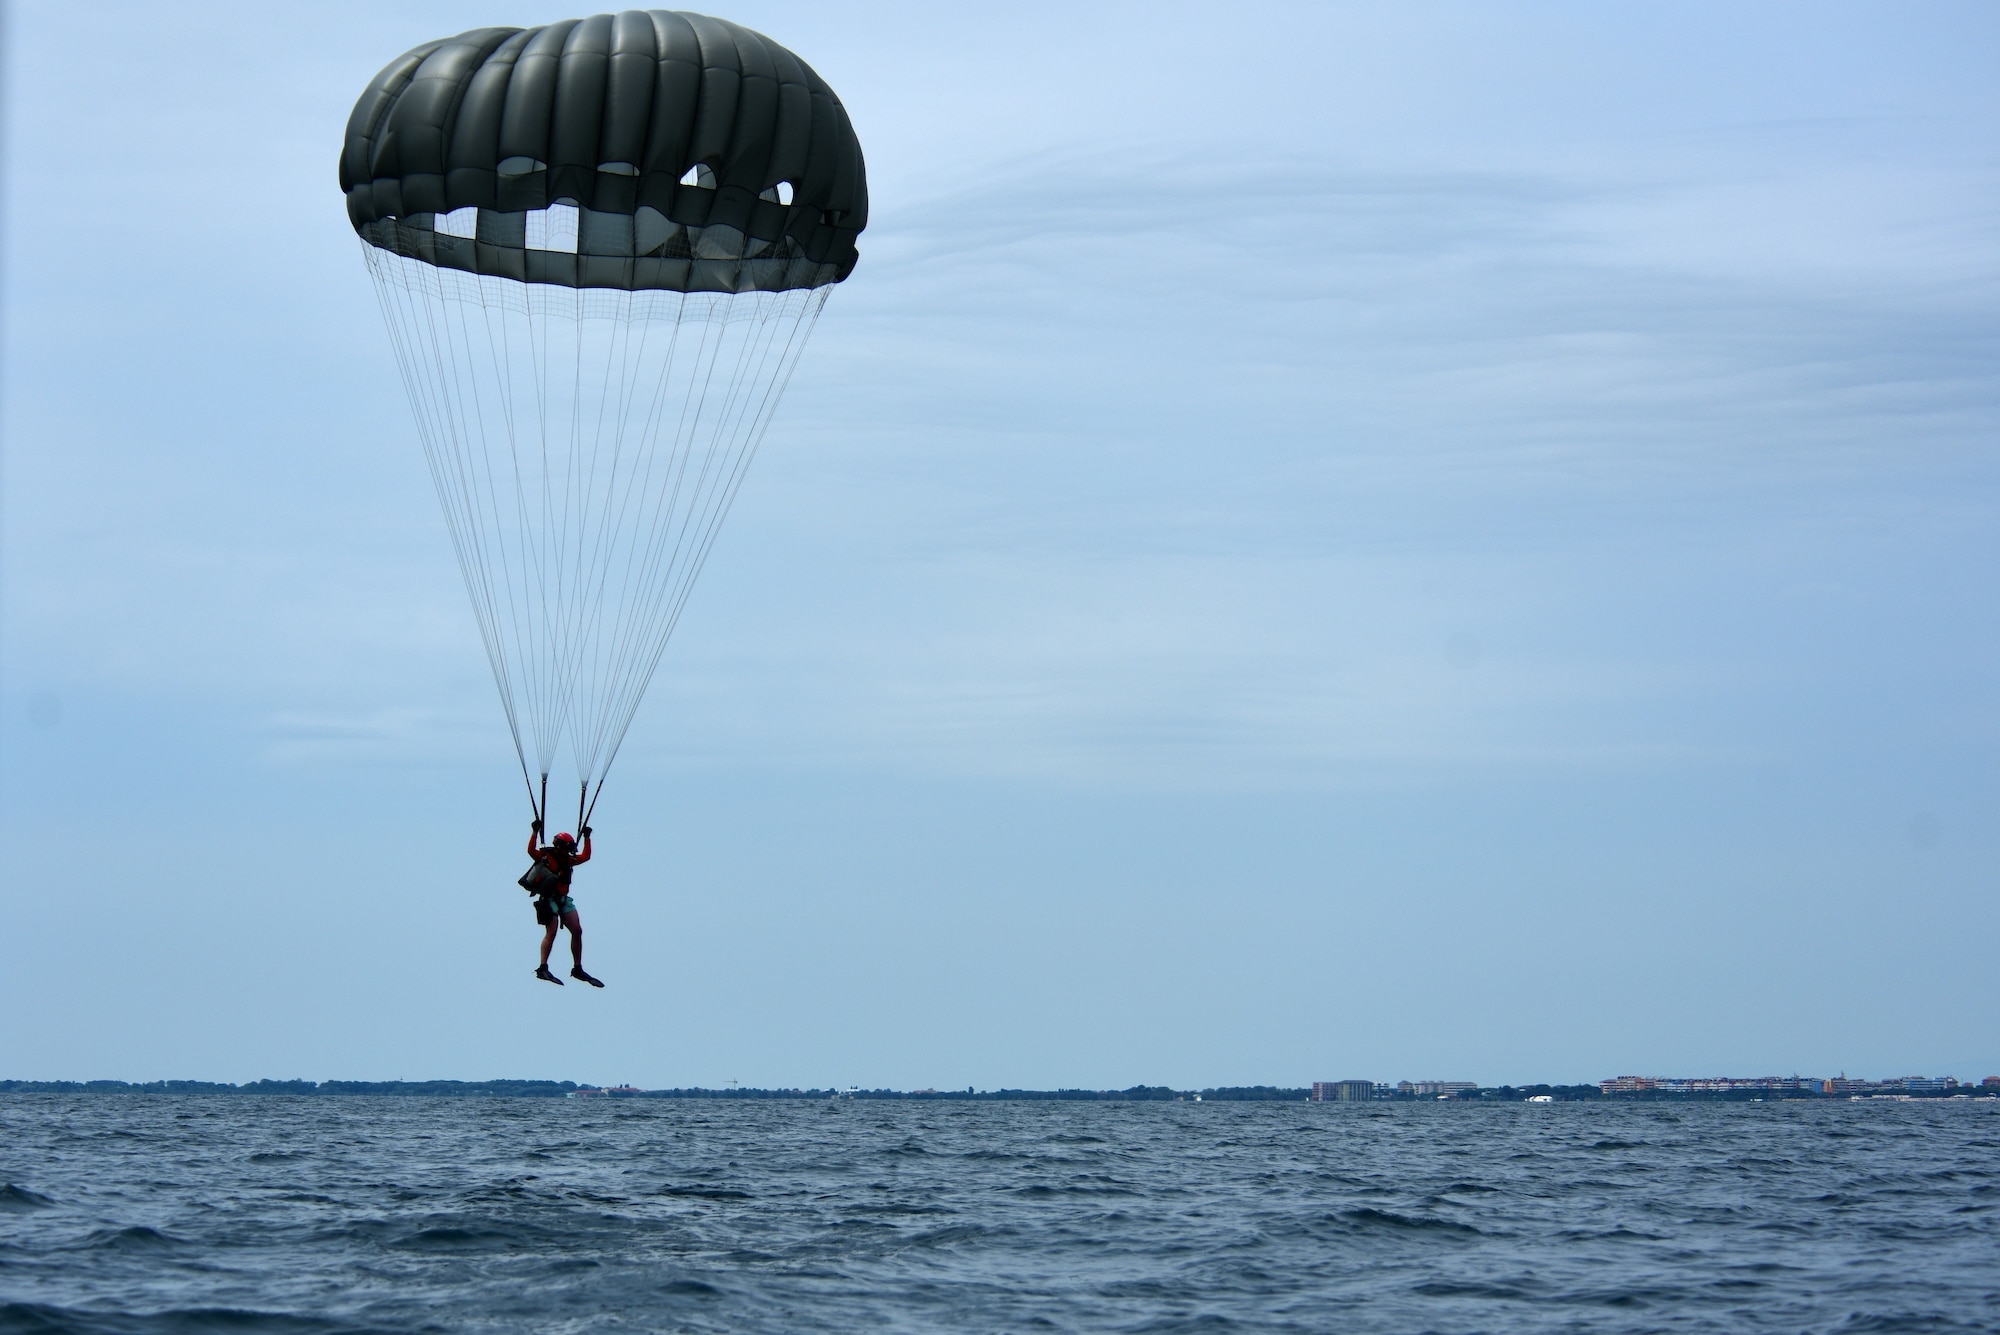 A U.S. Air Force pararescueman assigned to the 57th Rescue Squadron parachutes into the ocean during over-water parachute training off the coast of Italy, July 9, 2019. The Airmen partnered with C-130J Hercules aircraft and crews from Ramstein Air Base, Germany, in order to complete their quarterly parachute training. (U.S. Air Force photo by Staff Sgt. Kelsey Tucker)